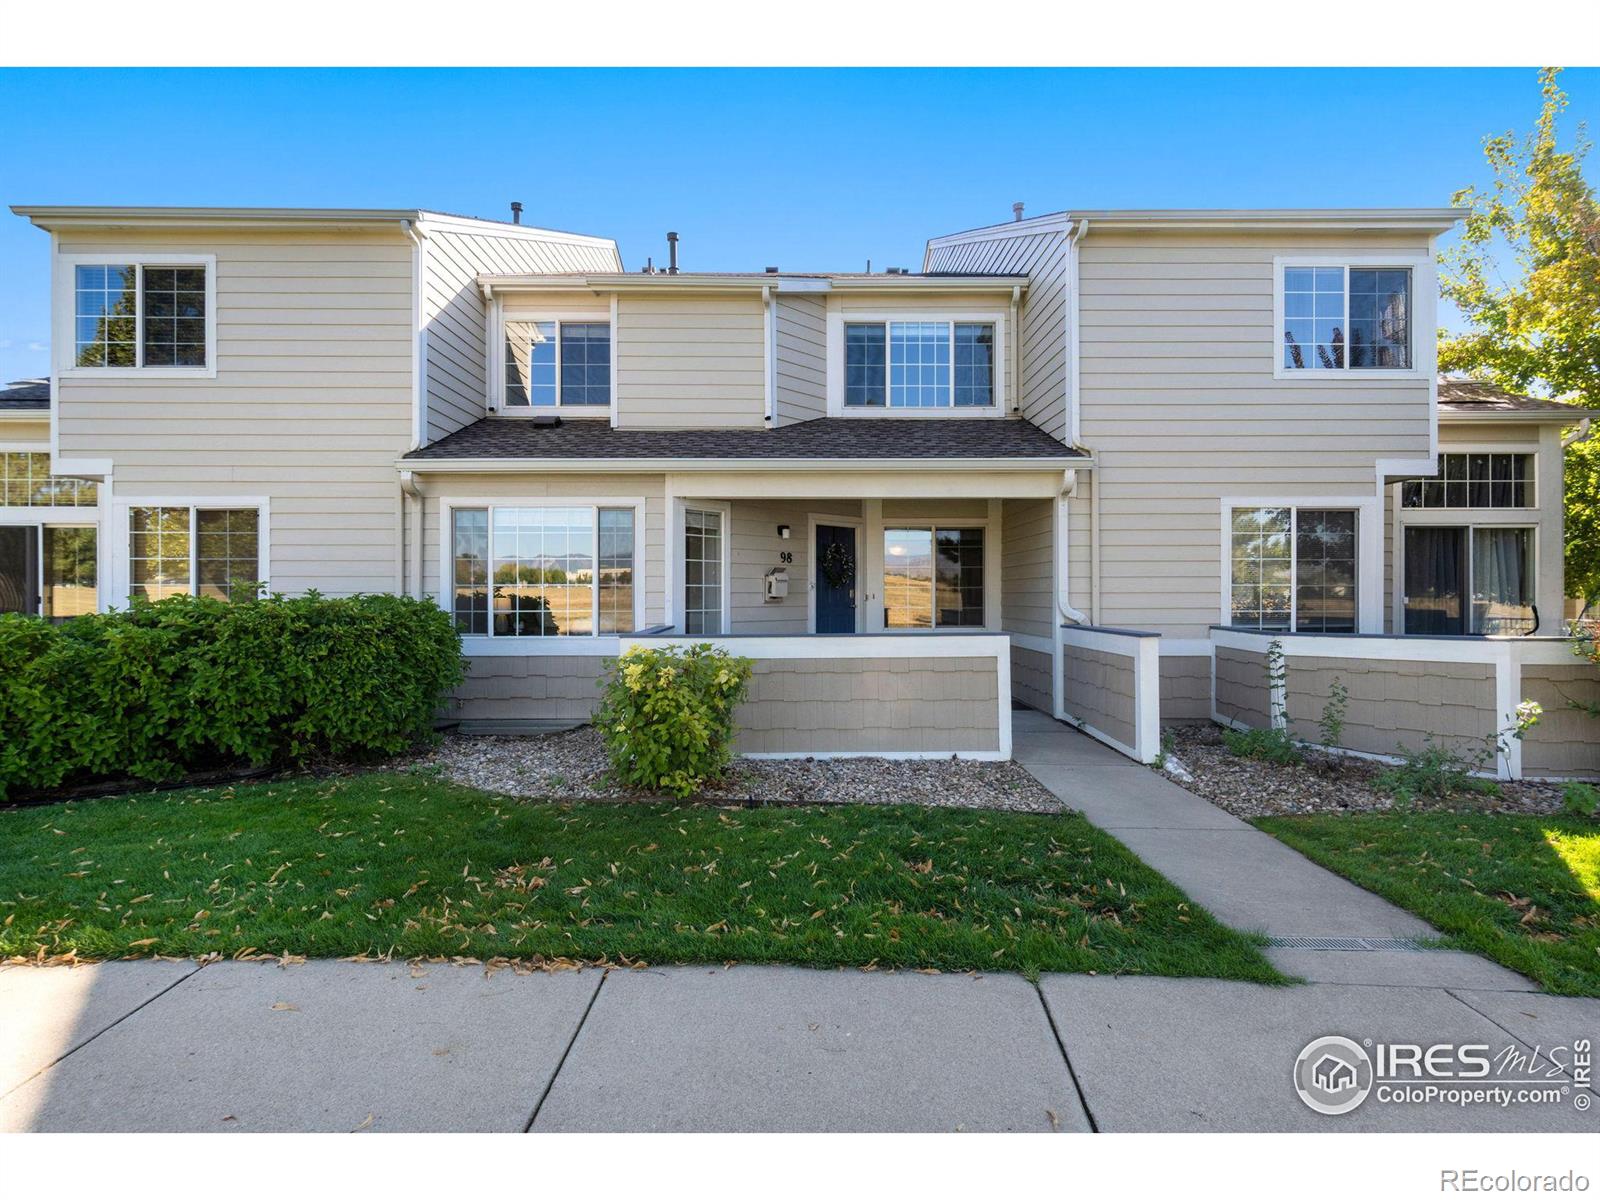 2502  Timberwood Drive, fort collins MLS: 123456789997144 Beds: 3 Baths: 4 Price: $400,000